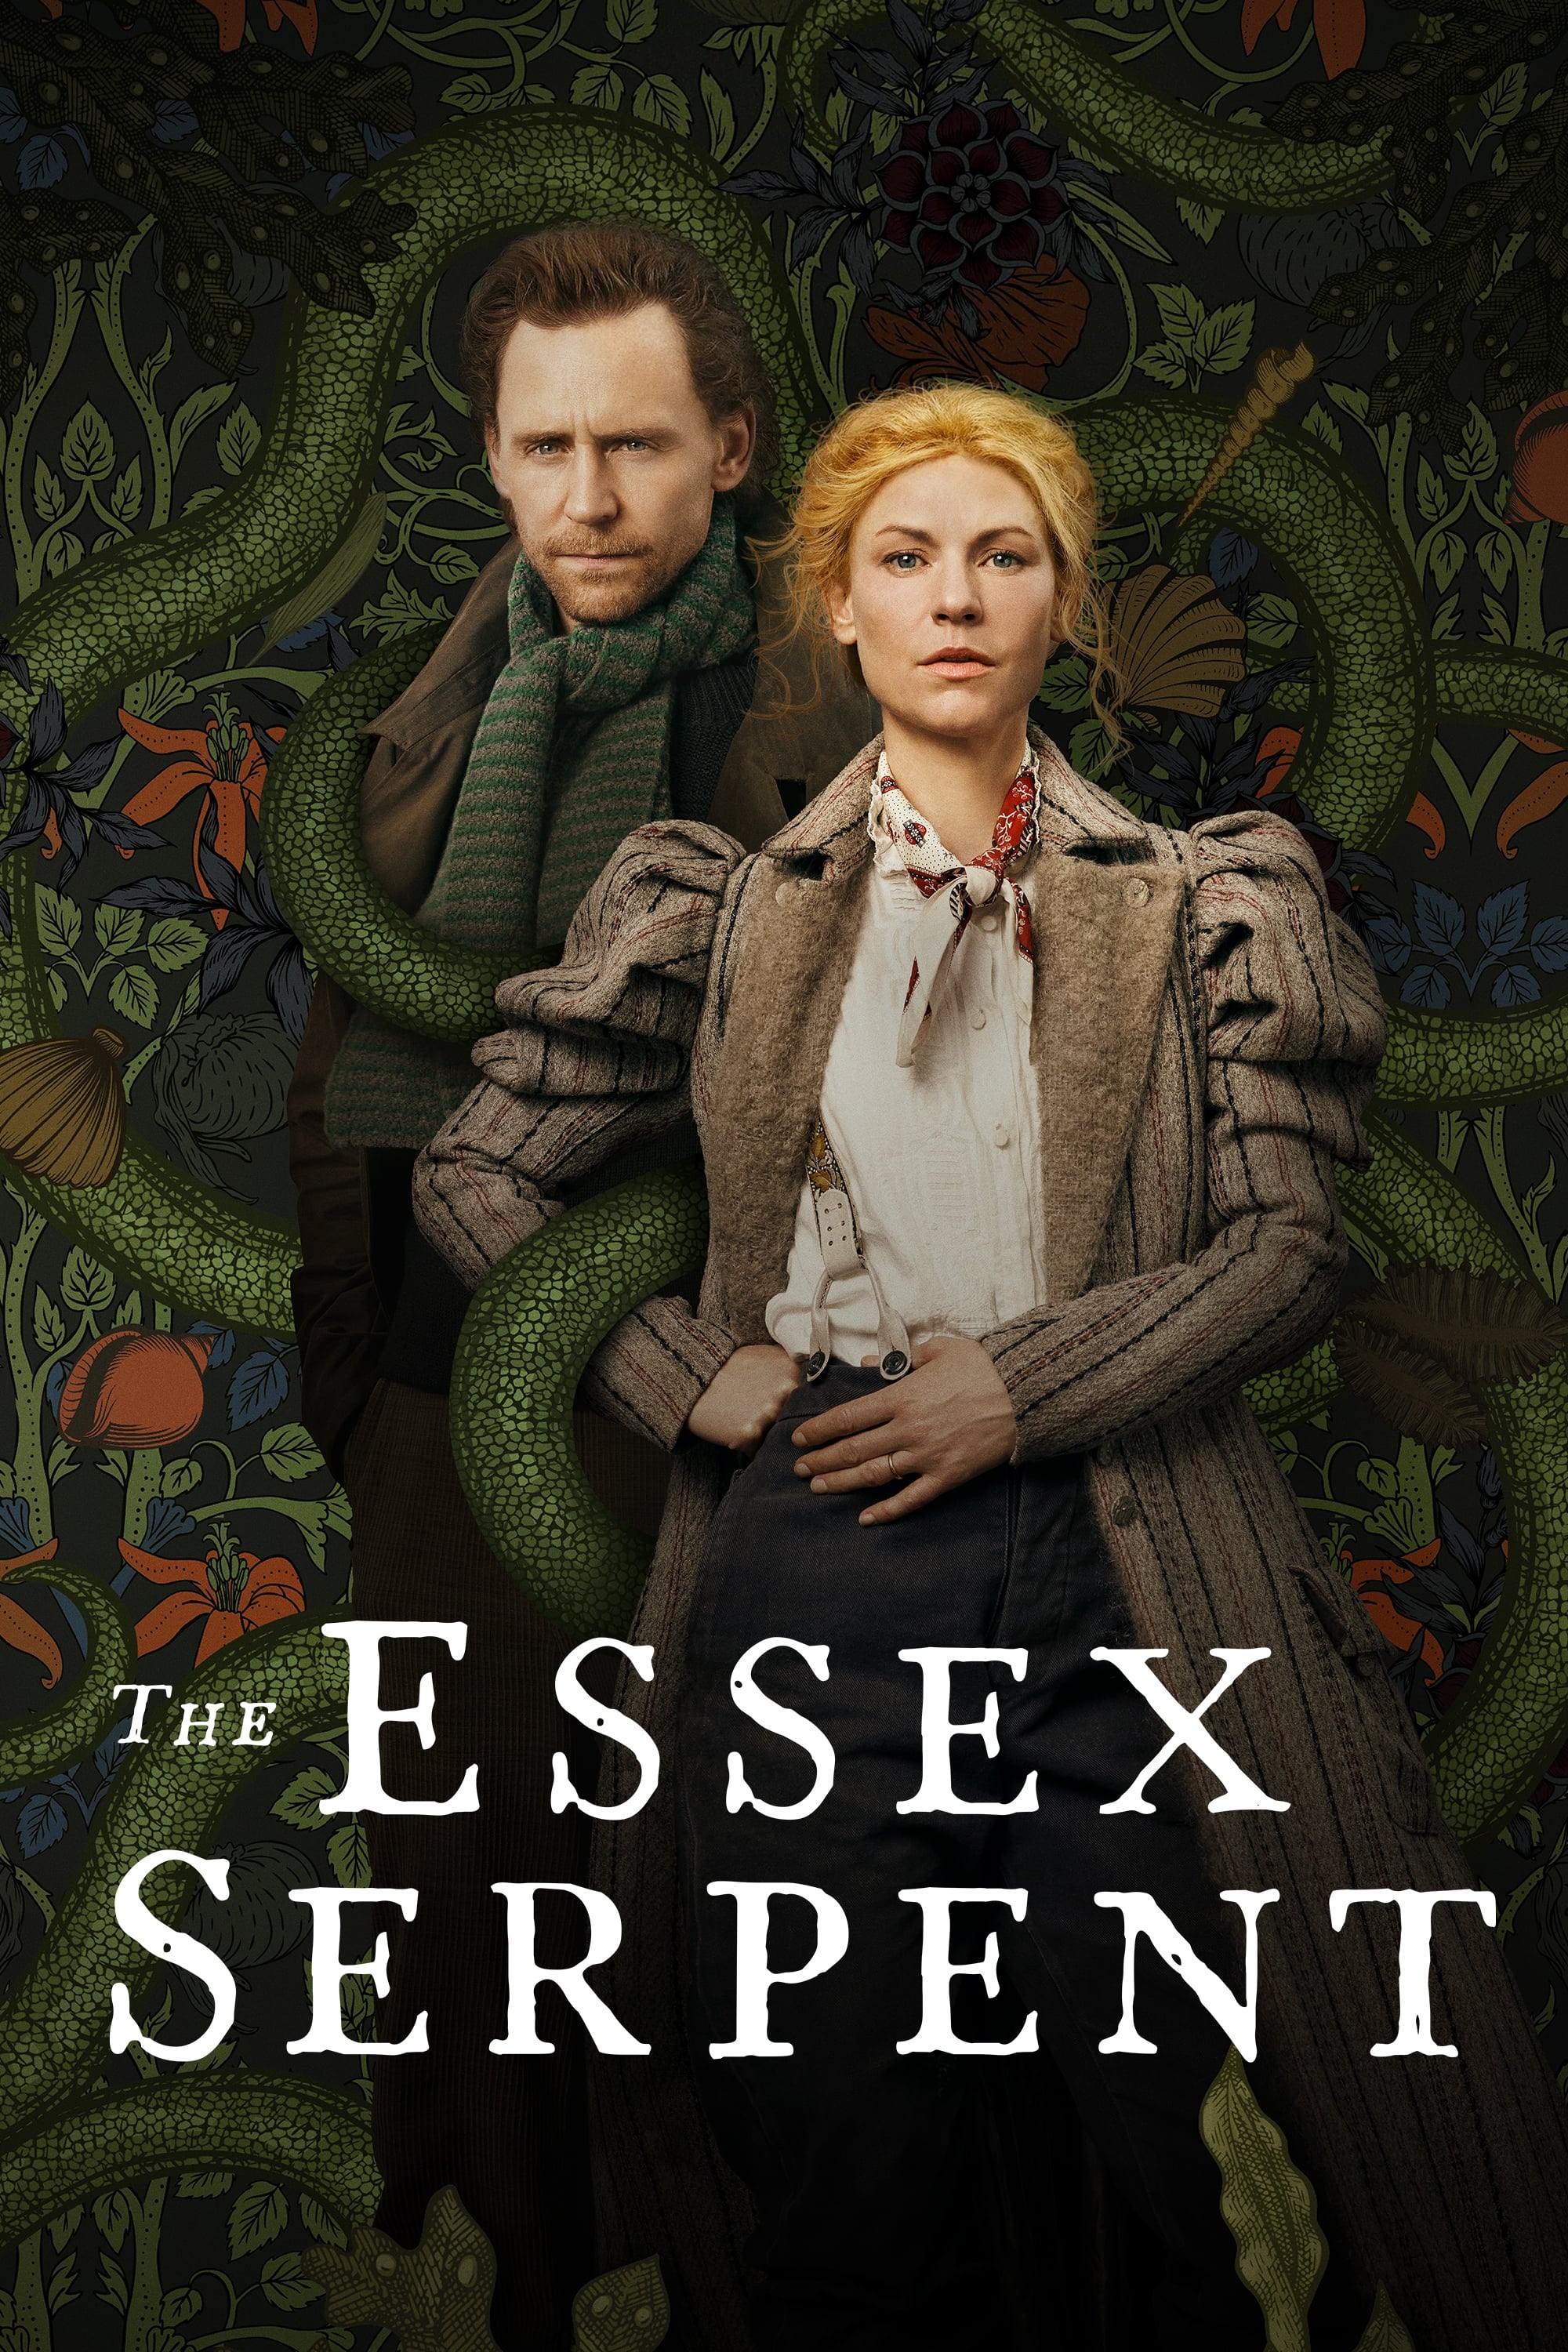 The Essex Serpent TV Shows About Based On Novel Or Book